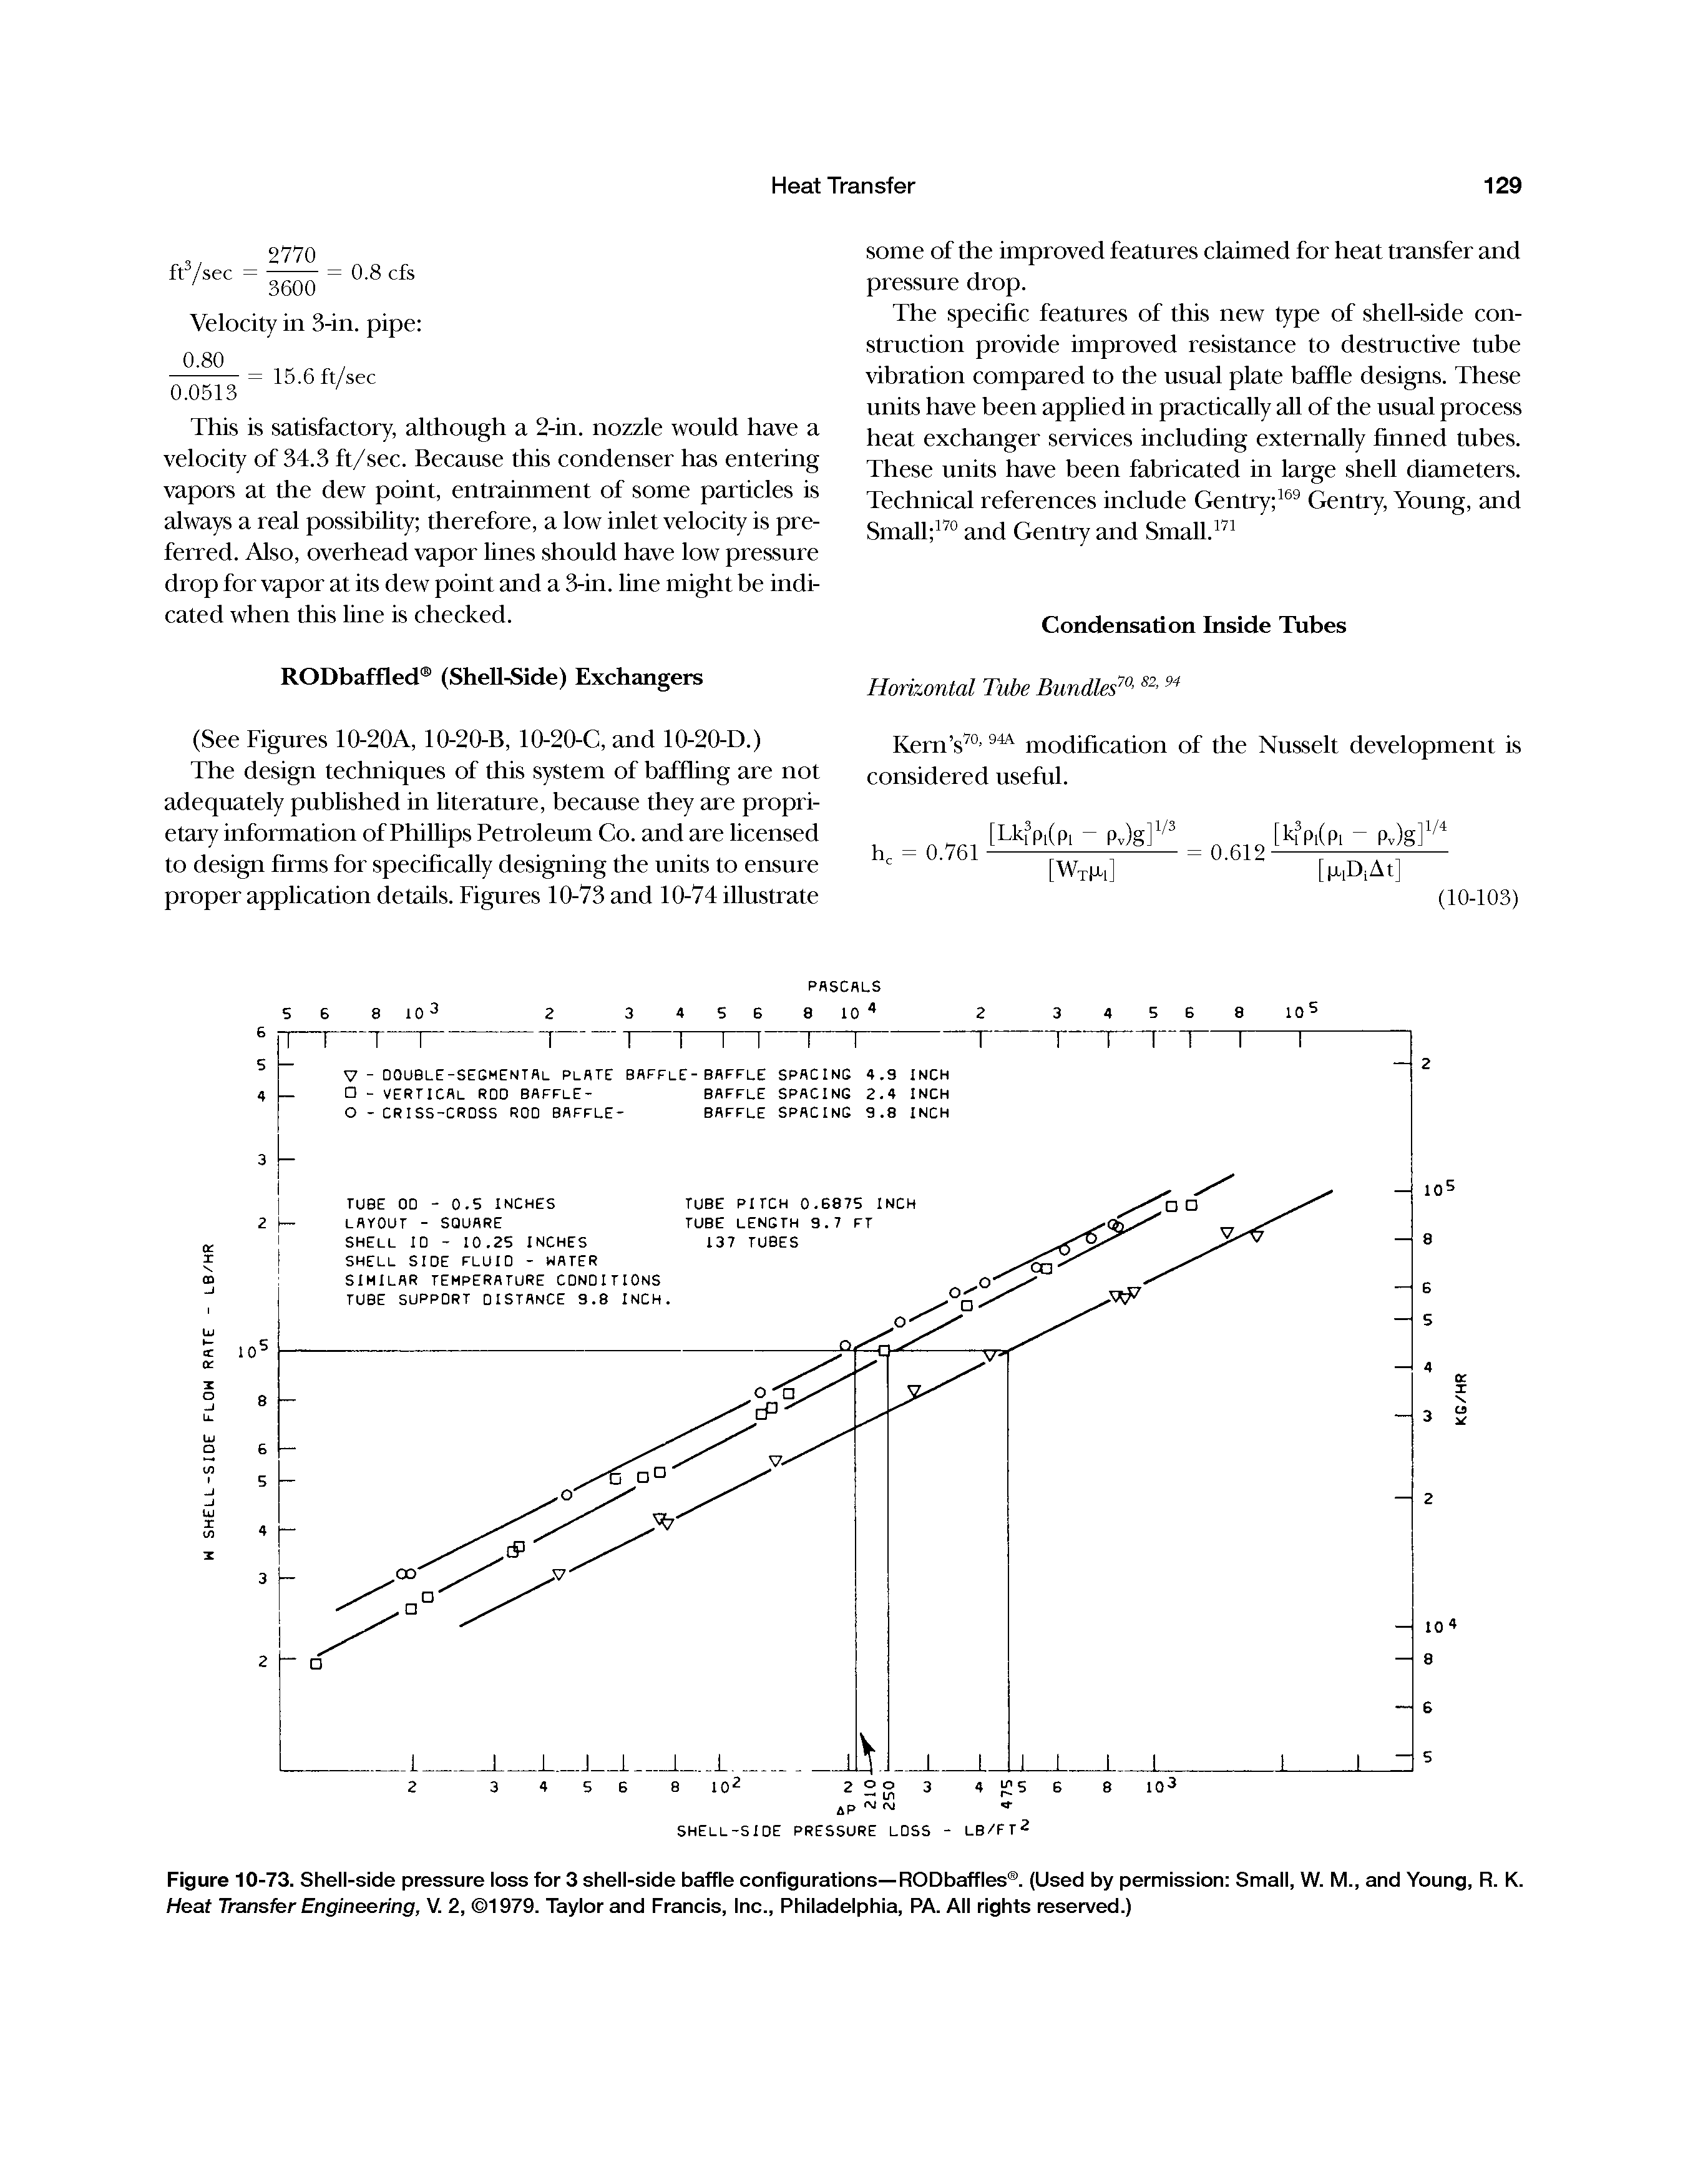 Figure 10-73. Shell-side pressure loss for 3 shell-side baffle configurations—RODbaffles . (Used by permission Small, W. M., and Young, R. K. Heat Transfer Engineering, V. 2, 1979. Taylor and Francis, Inc., Philadelphia, PA. All rights reserved.)...